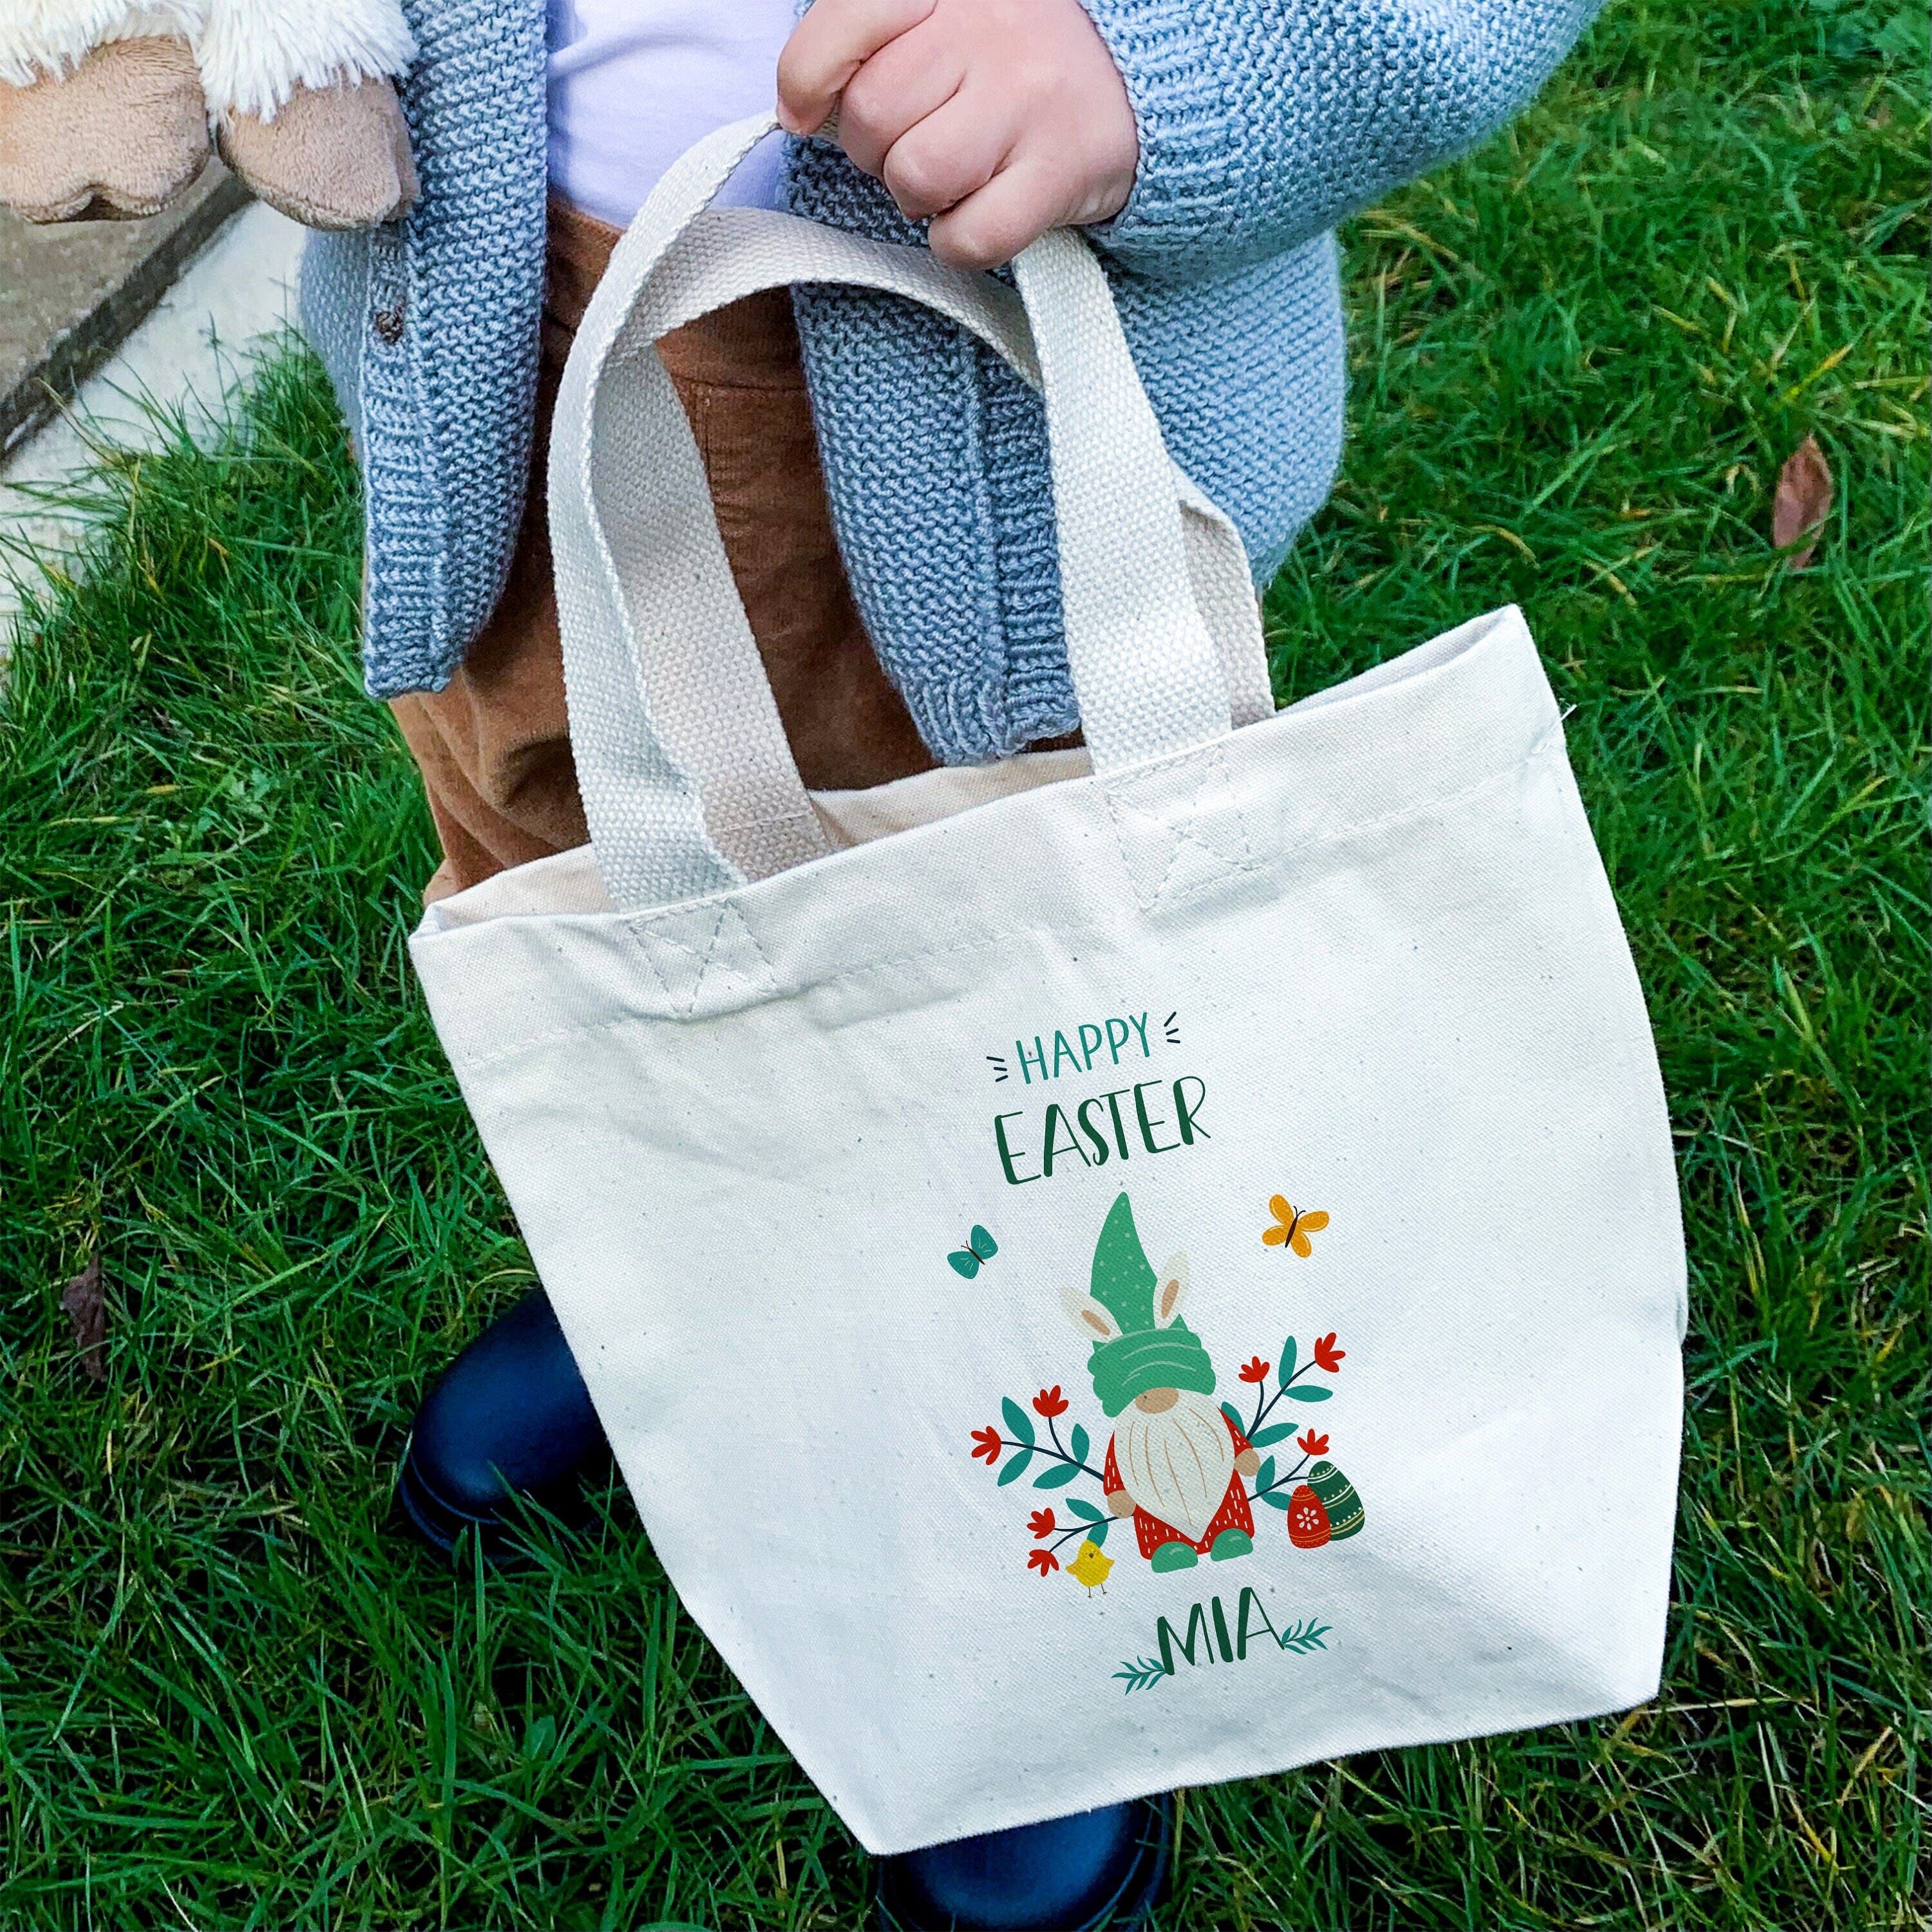 Personalised cute gnome mini Easter bag with name, Egg hunt bags, Girls or boys baskets